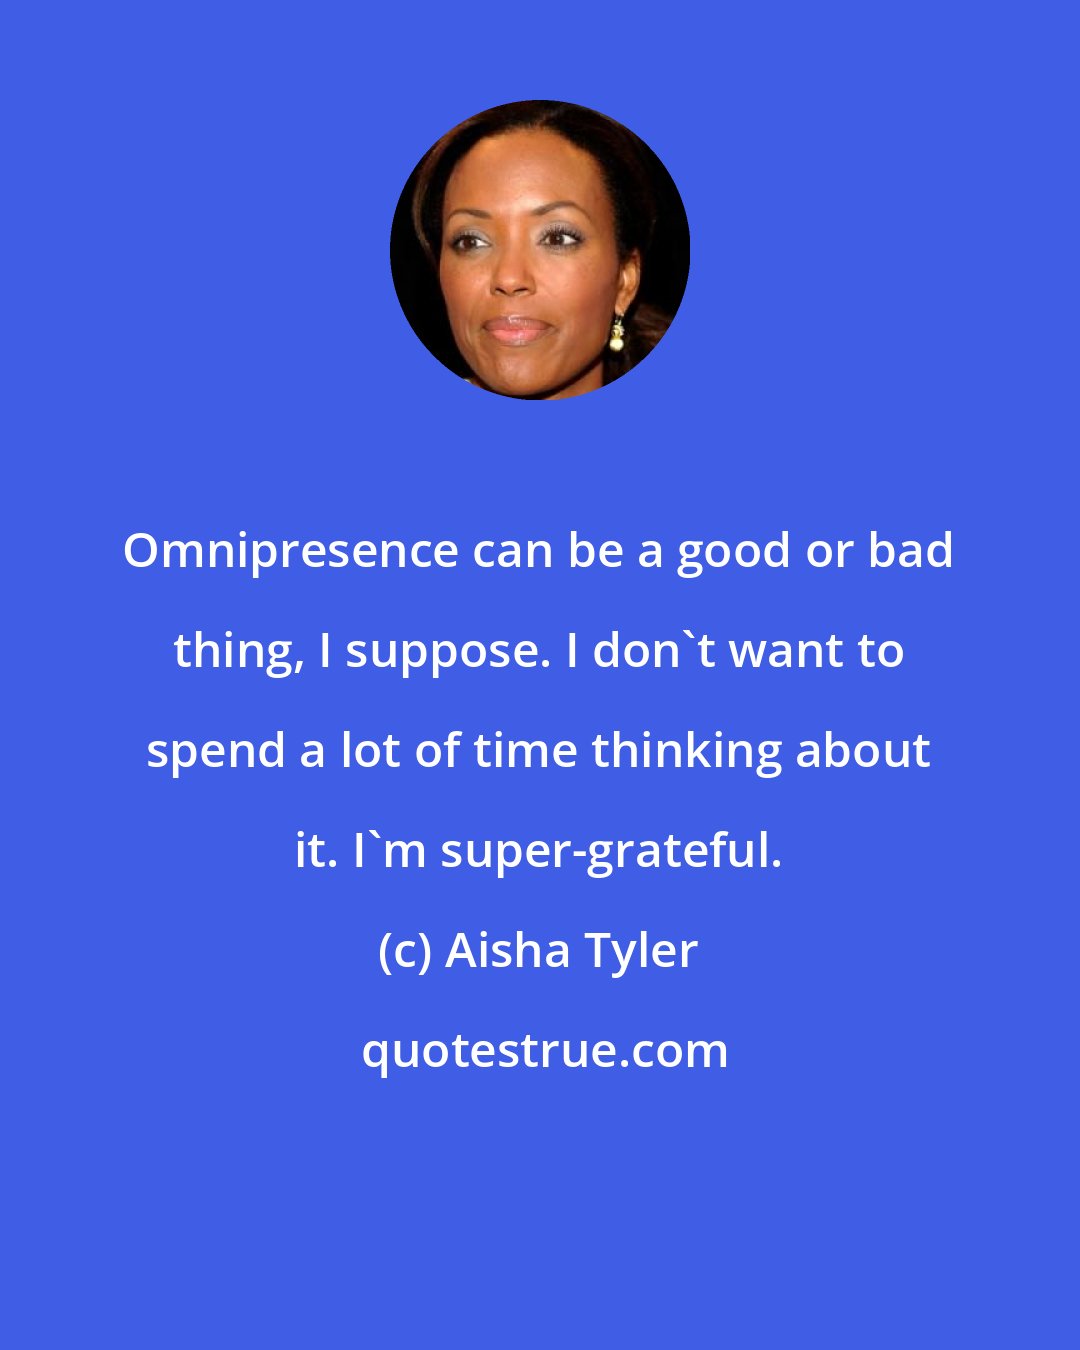 Aisha Tyler: Omnipresence can be a good or bad thing, I suppose. I don't want to spend a lot of time thinking about it. I'm super-grateful.